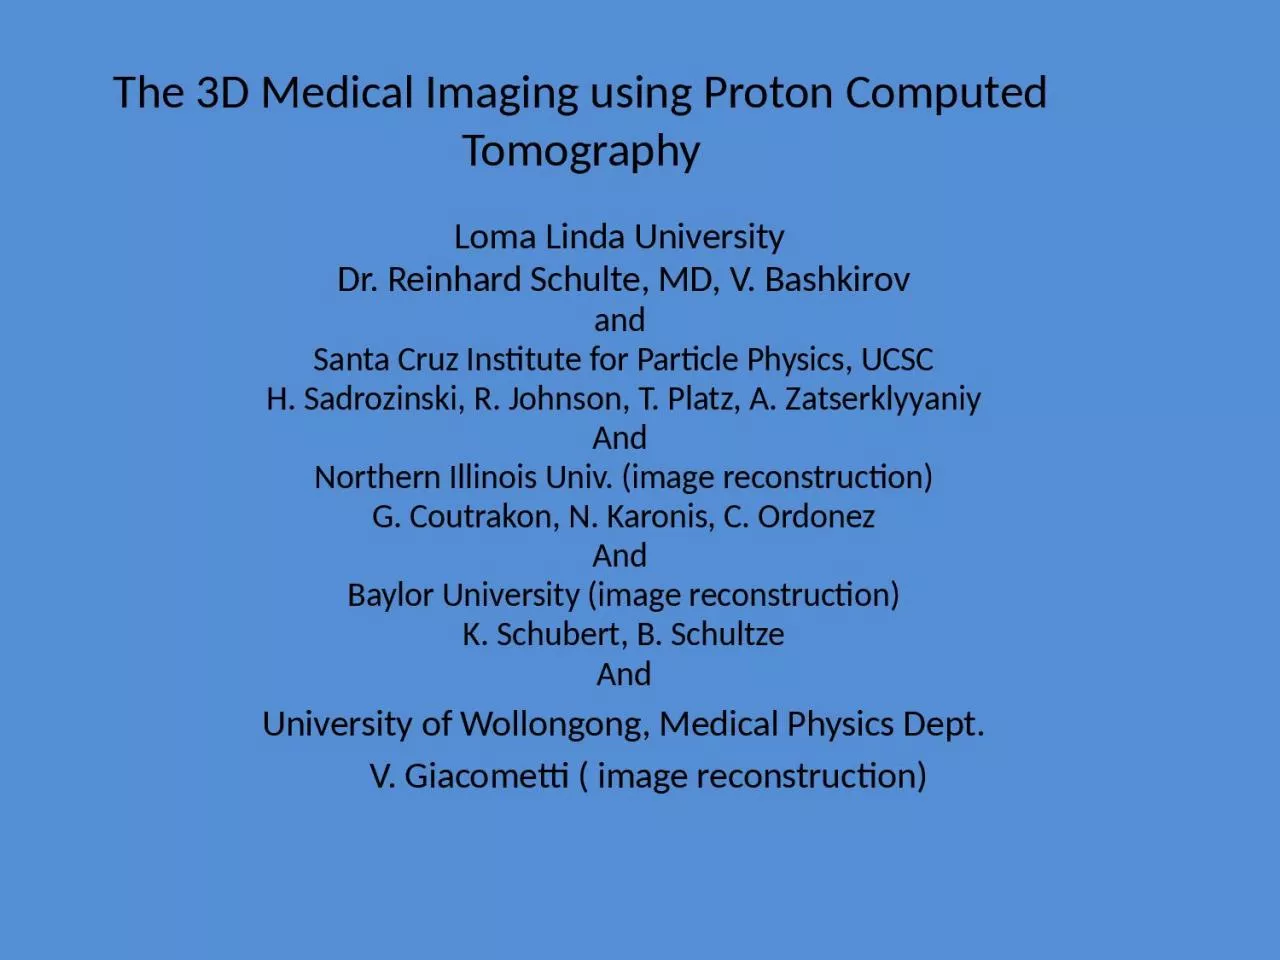 The 3D Medical Imaging using Proton Computed Tomography